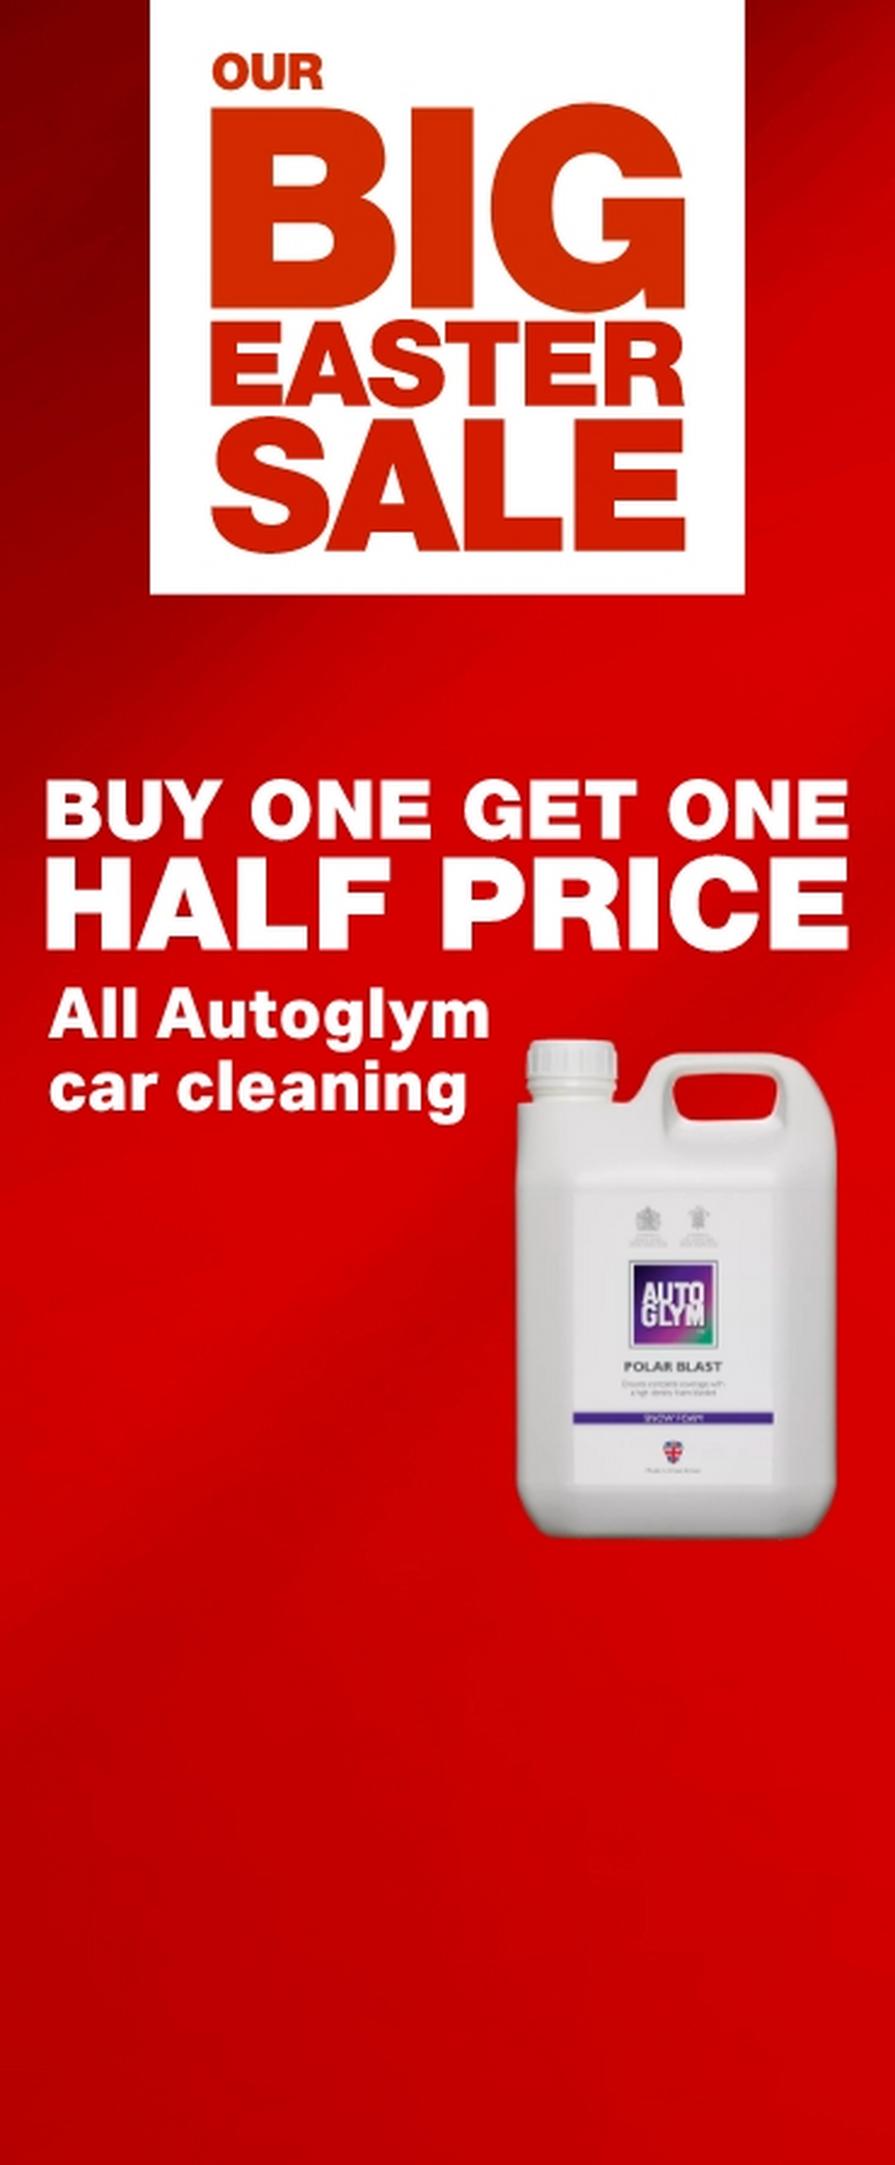 Our big Easter sale. Buy one get one half price autoglym car cleaning 